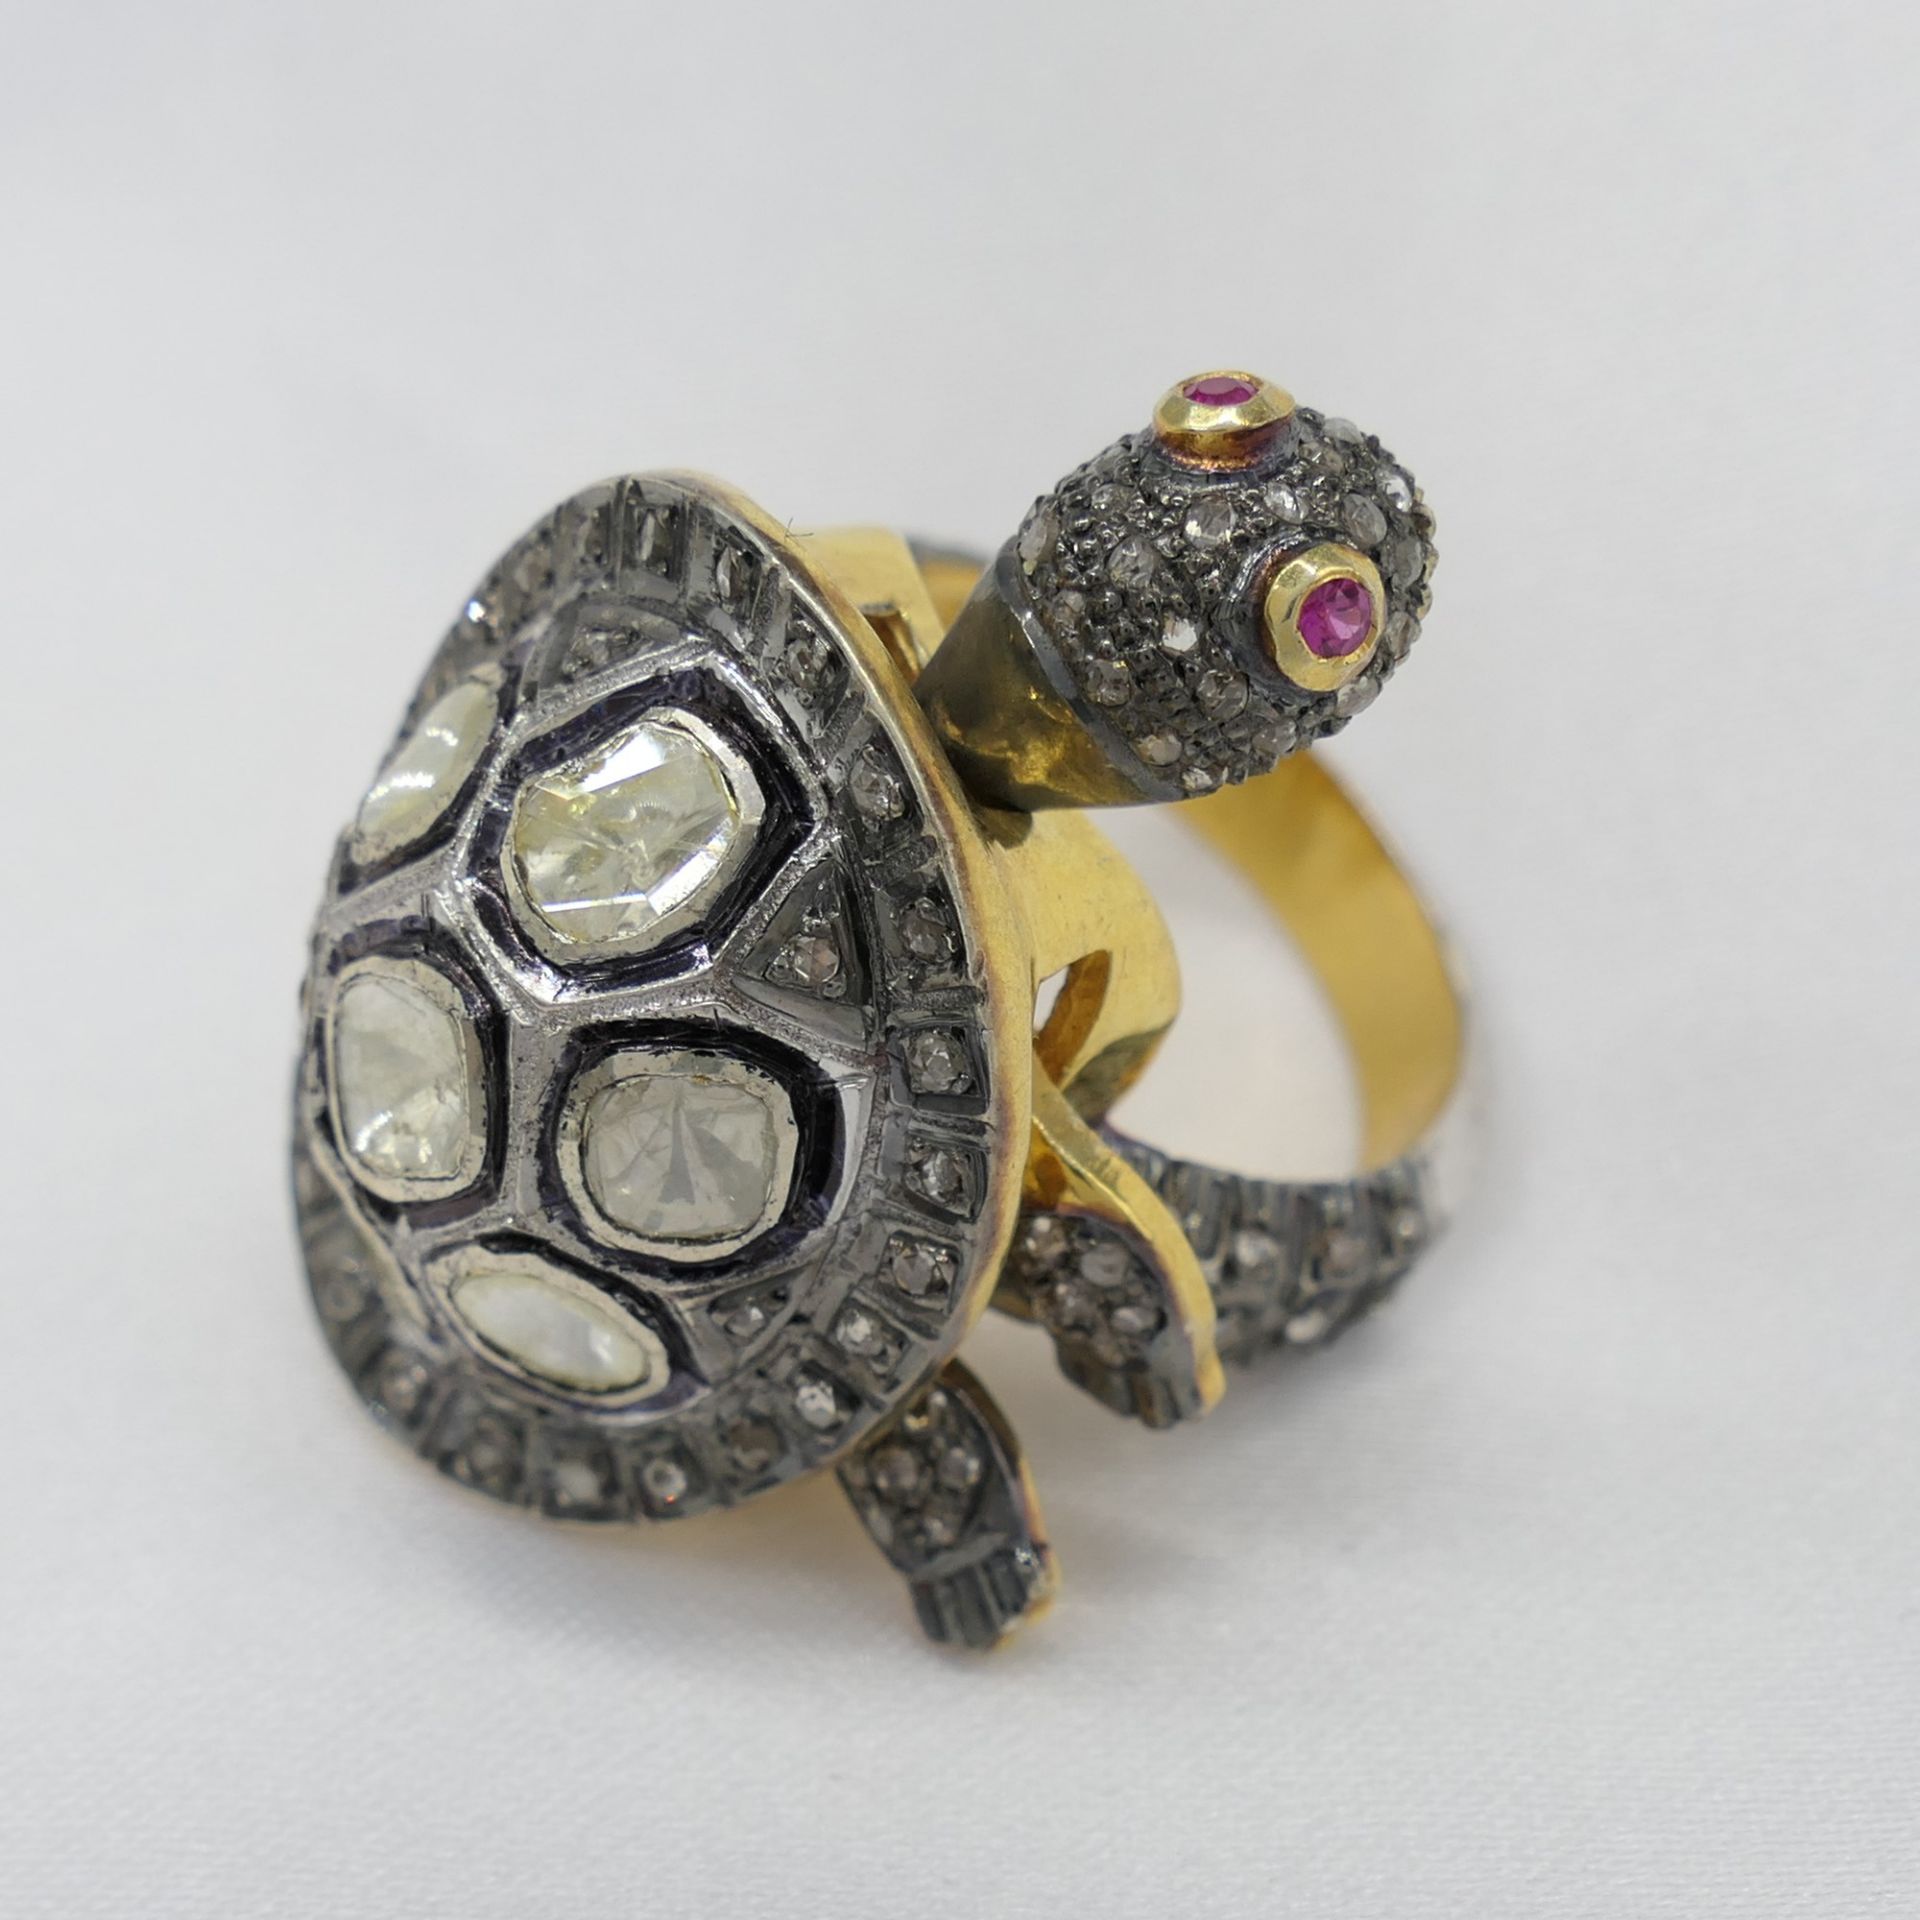 Distinctive 1.30 Carat Diamond and Ruby Tortoise Ring With Movable Body Parts - Image 3 of 6